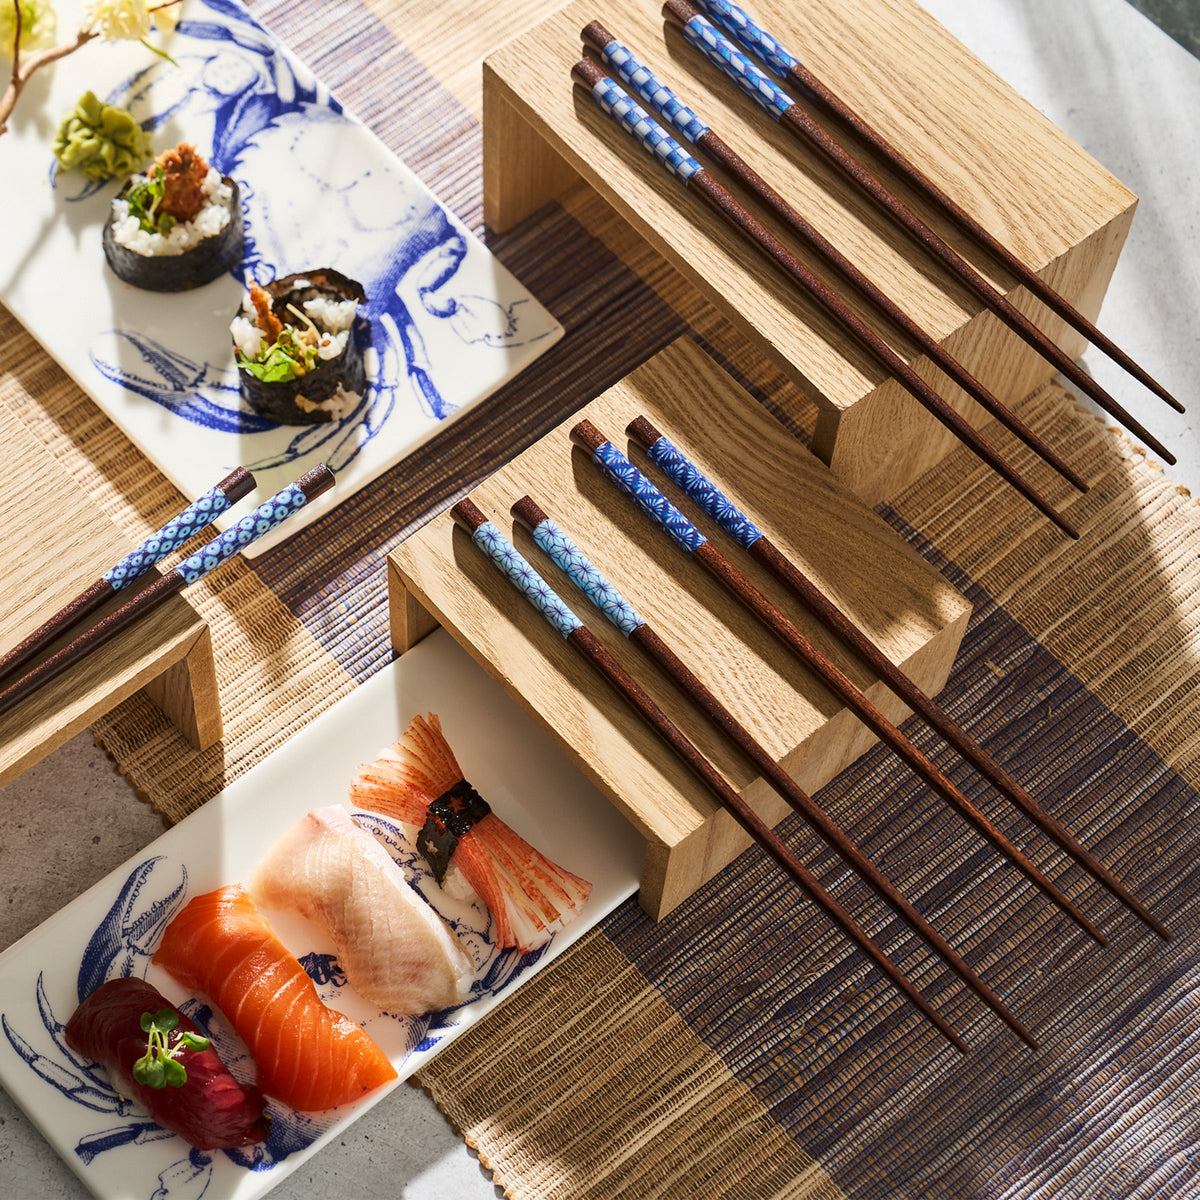 A table set with high style, featuring sushi and sashimi on Caskata Crab Medium Sushi Trays, Set of 2, decorated with blue designs, placed on woven mats alongside wooden chopstick rests holding pairs of chopsticks with blue patterned handles.